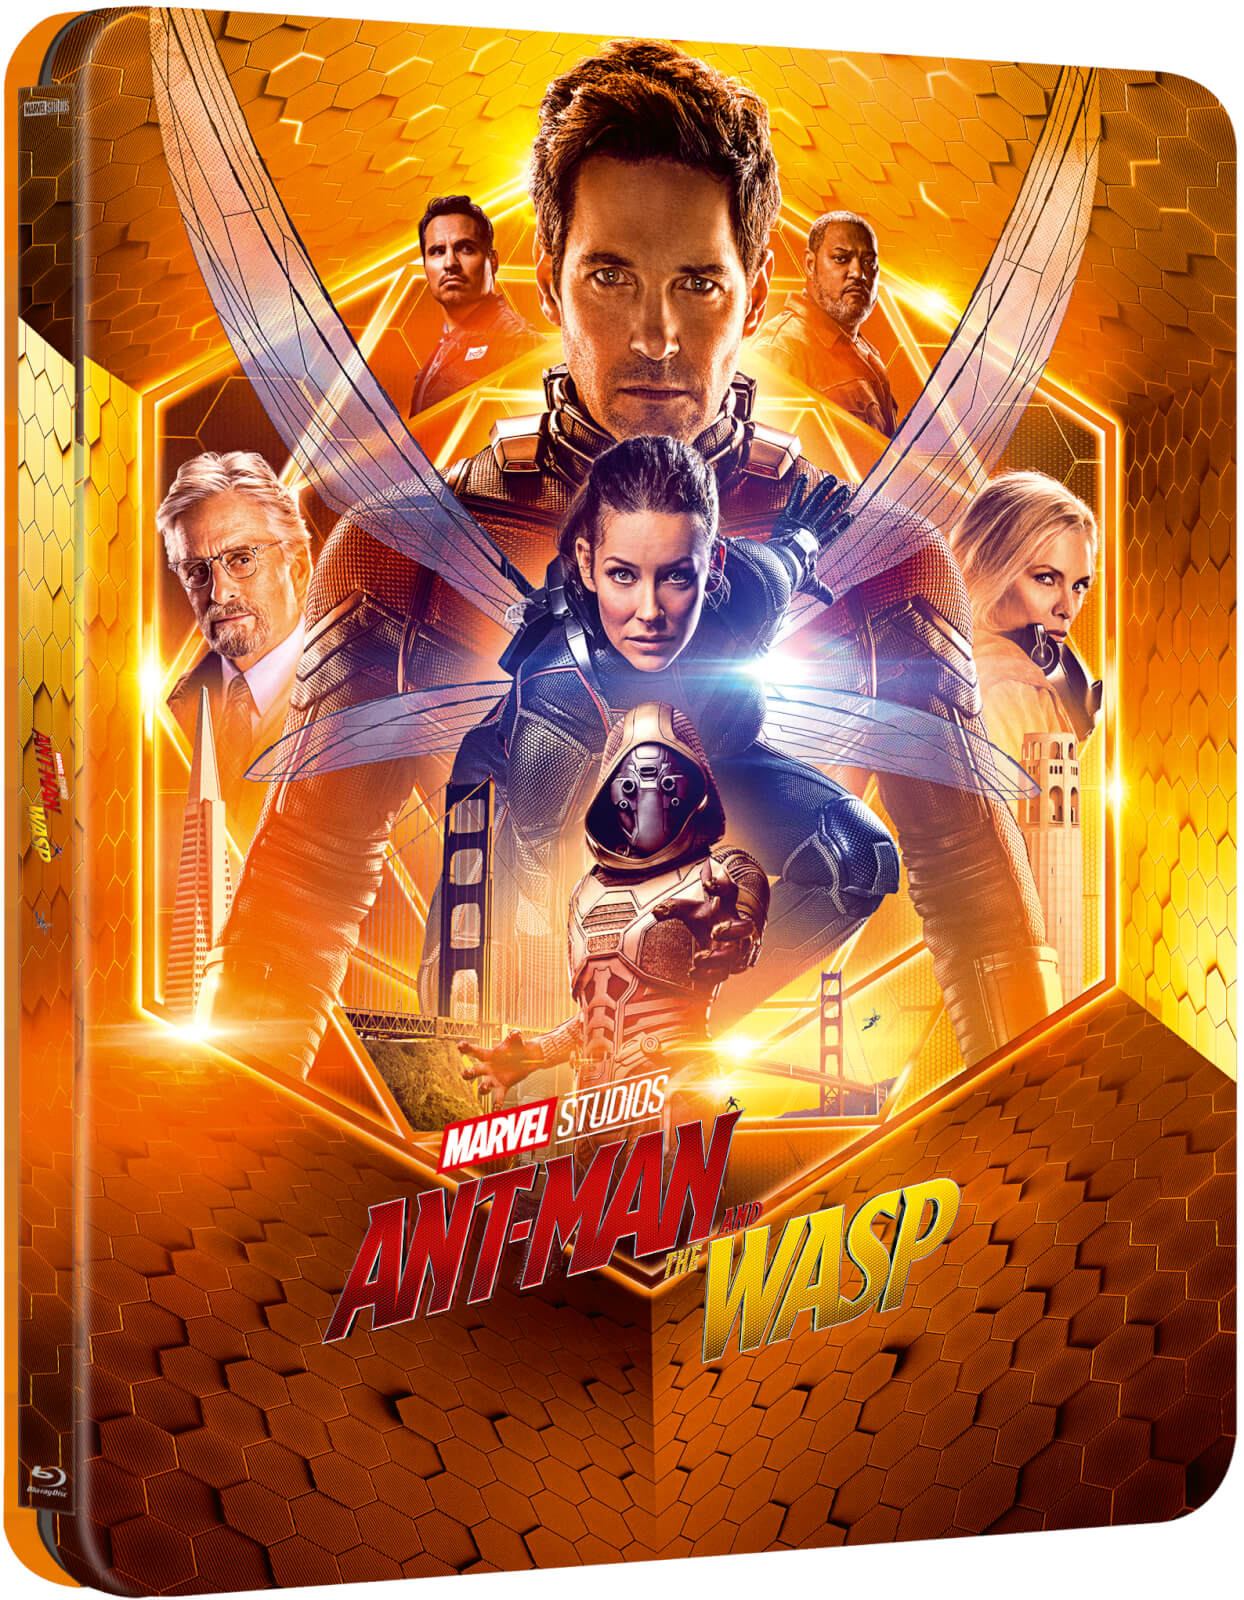 Ant-Man-and-the-Wasp-steelbook-zavvi-1.j